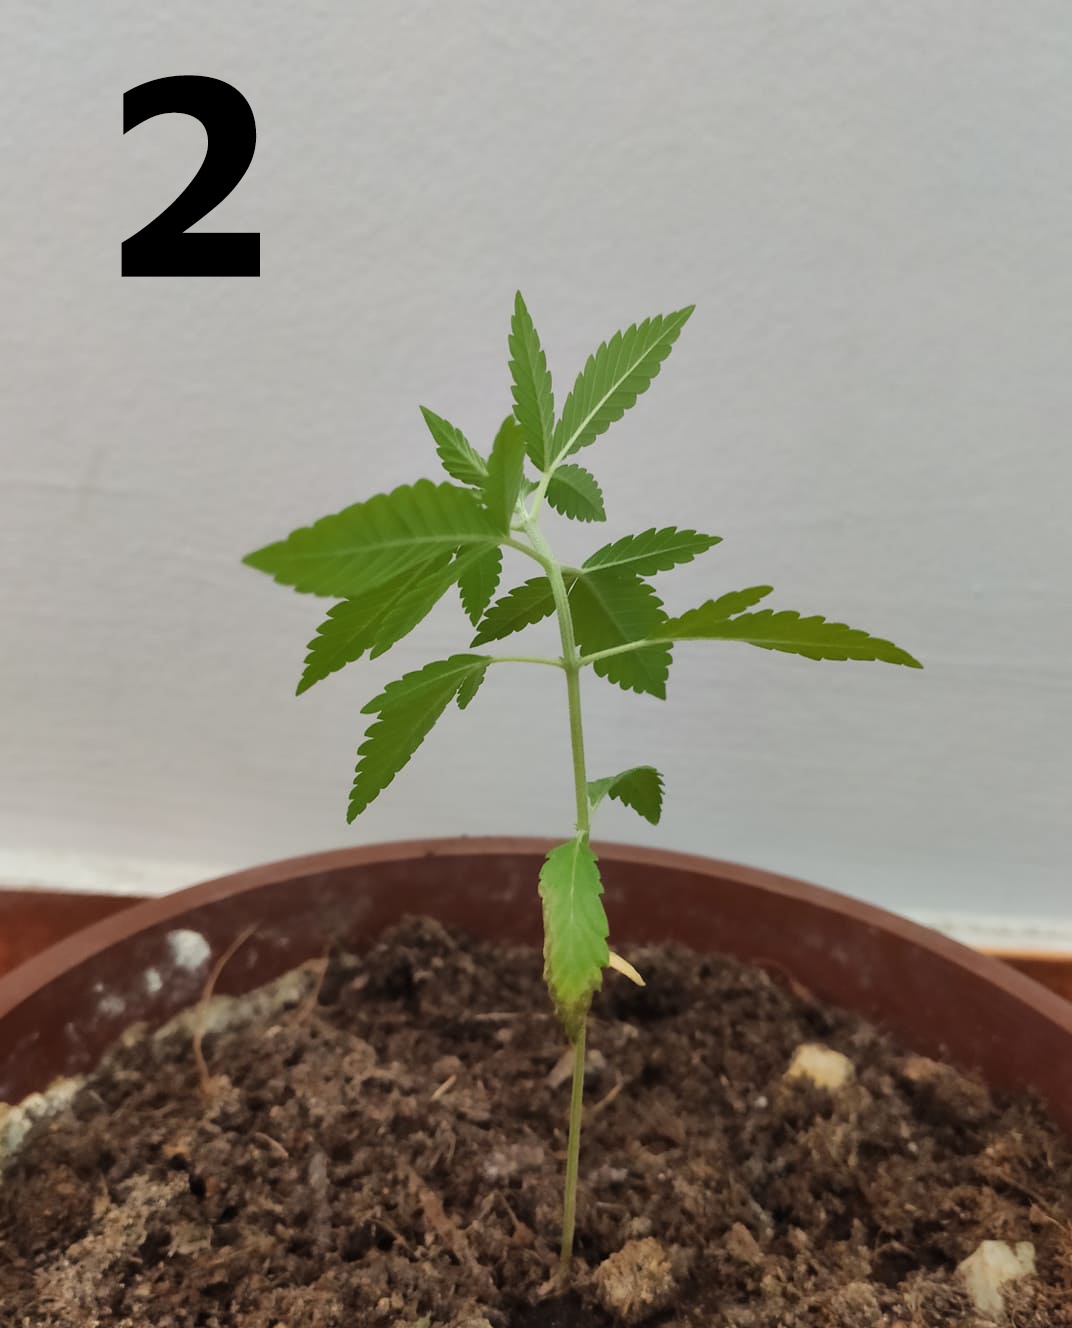 Plants stopped growing problem 2